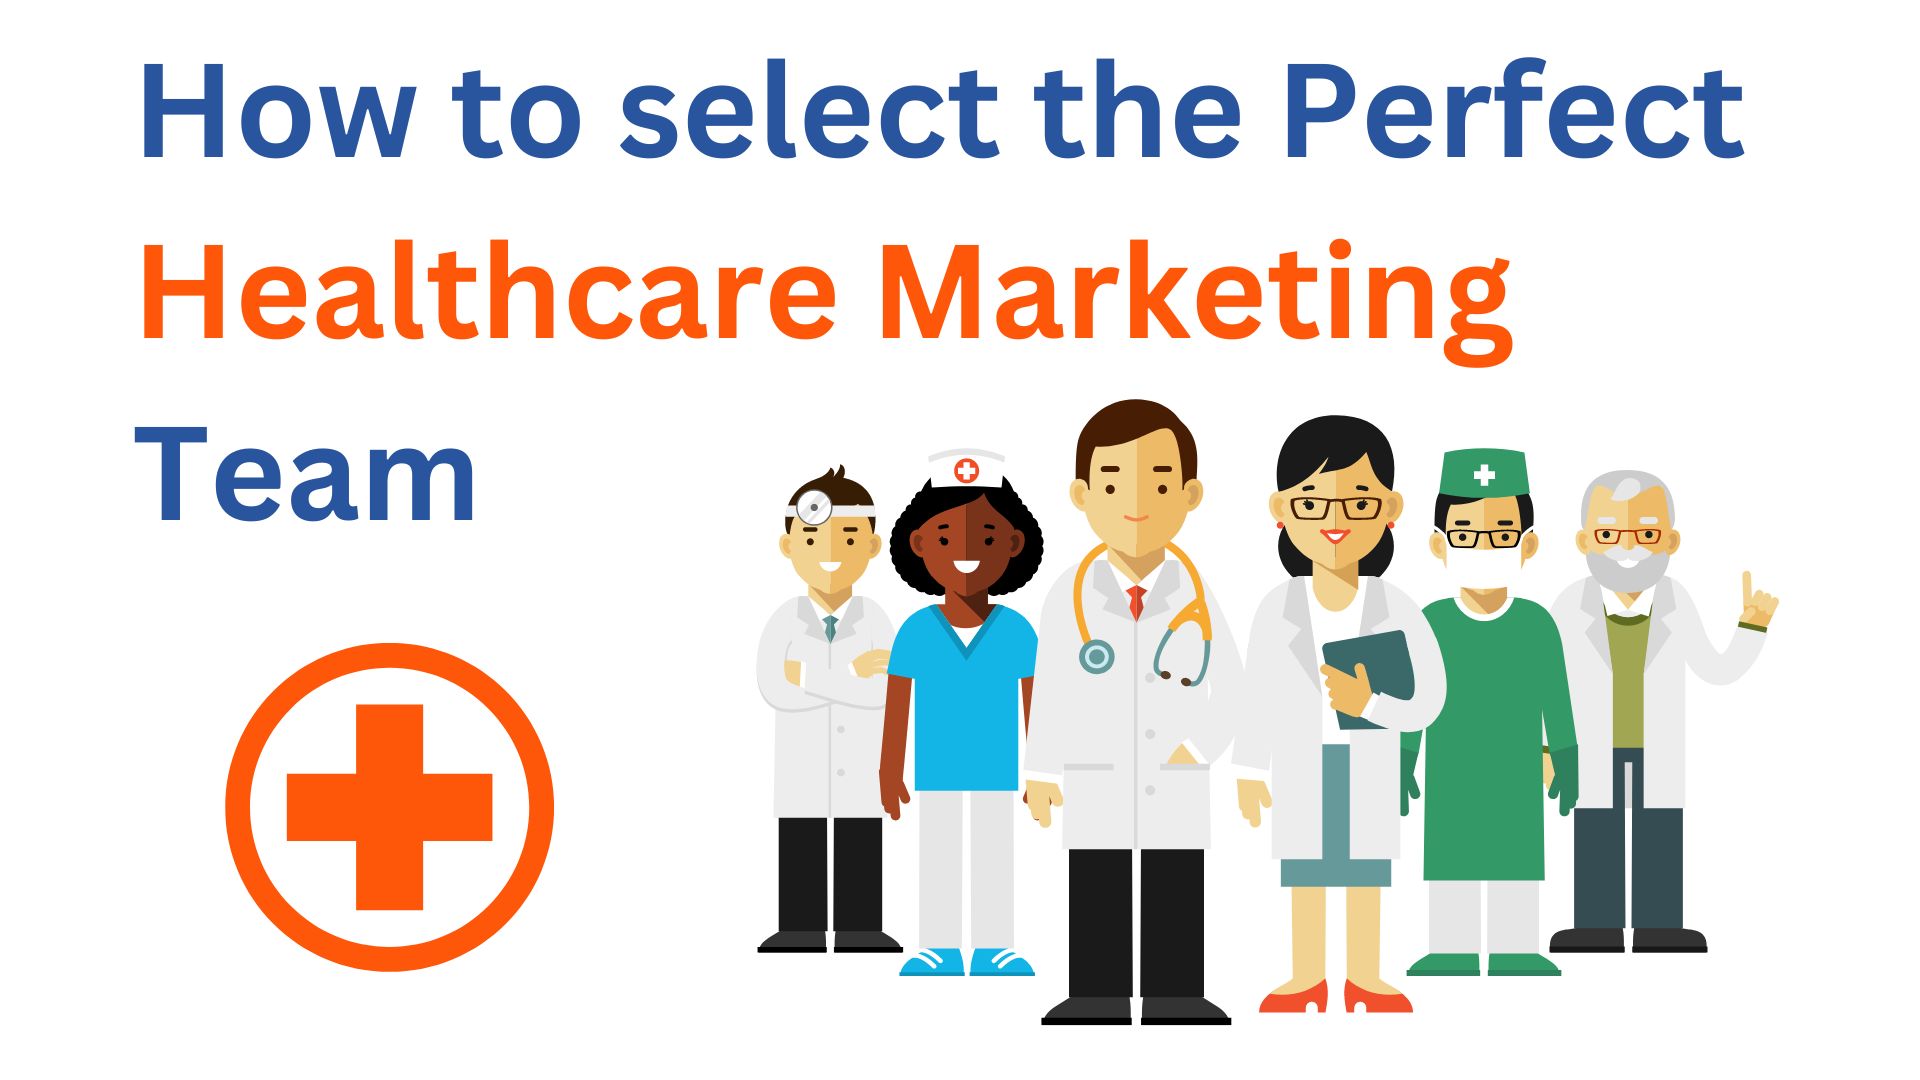 How to select the Perfect Healthcare Marketing Team